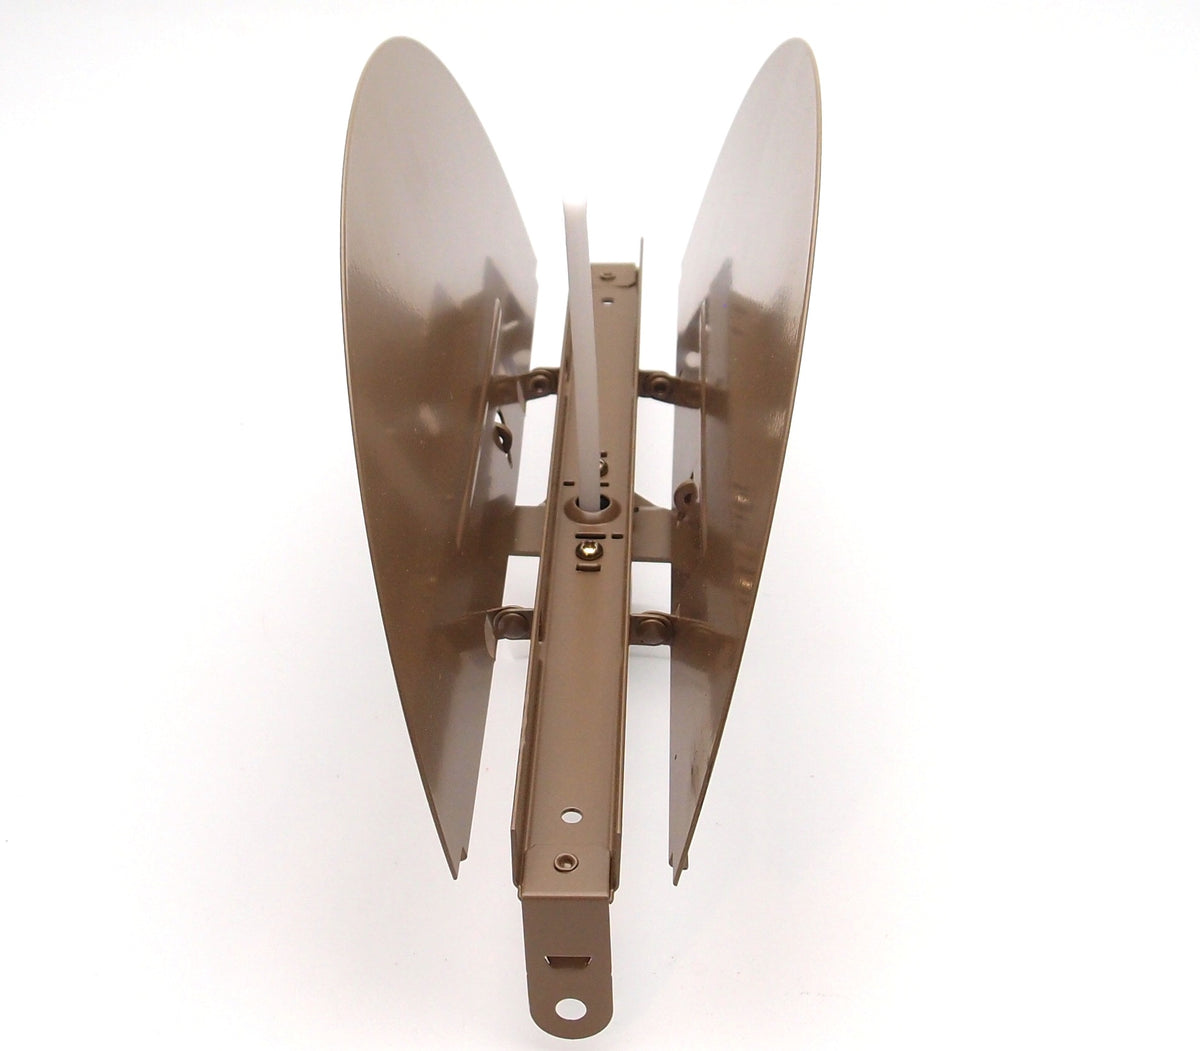 6&quot; BUTTERFLY DAMPER - For T-Bar, Drop Ceiling Grilles, Lay in Diffusers of 24x24 (6&quot; round duct opening)